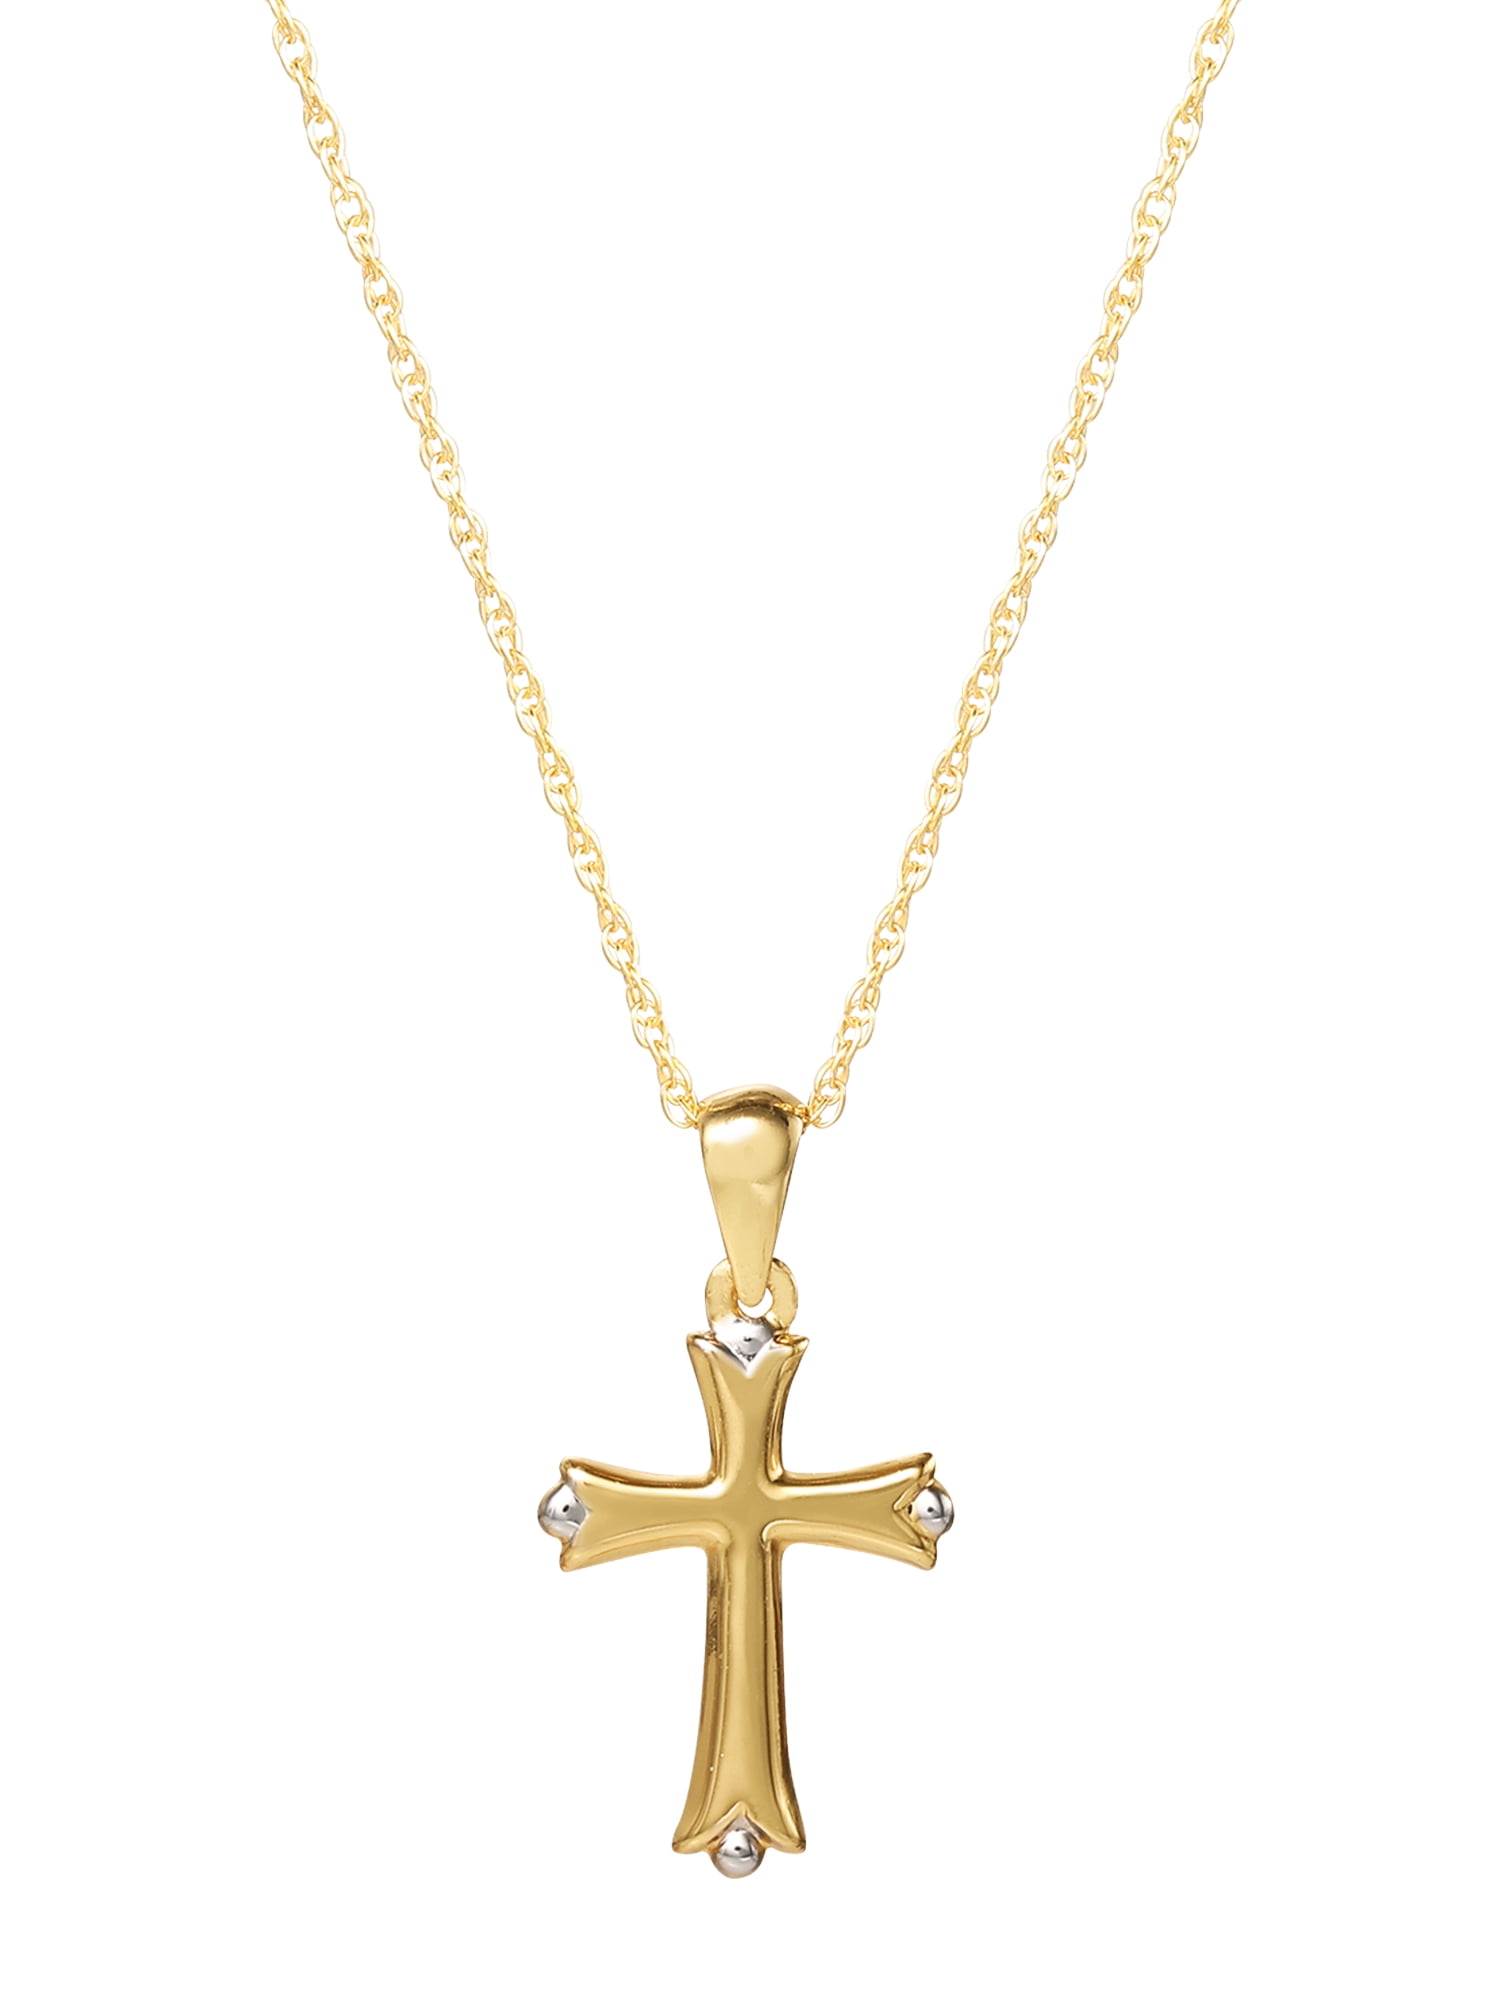 Sterling Silver 14KT Plated Cross Pendant, 18" Chain